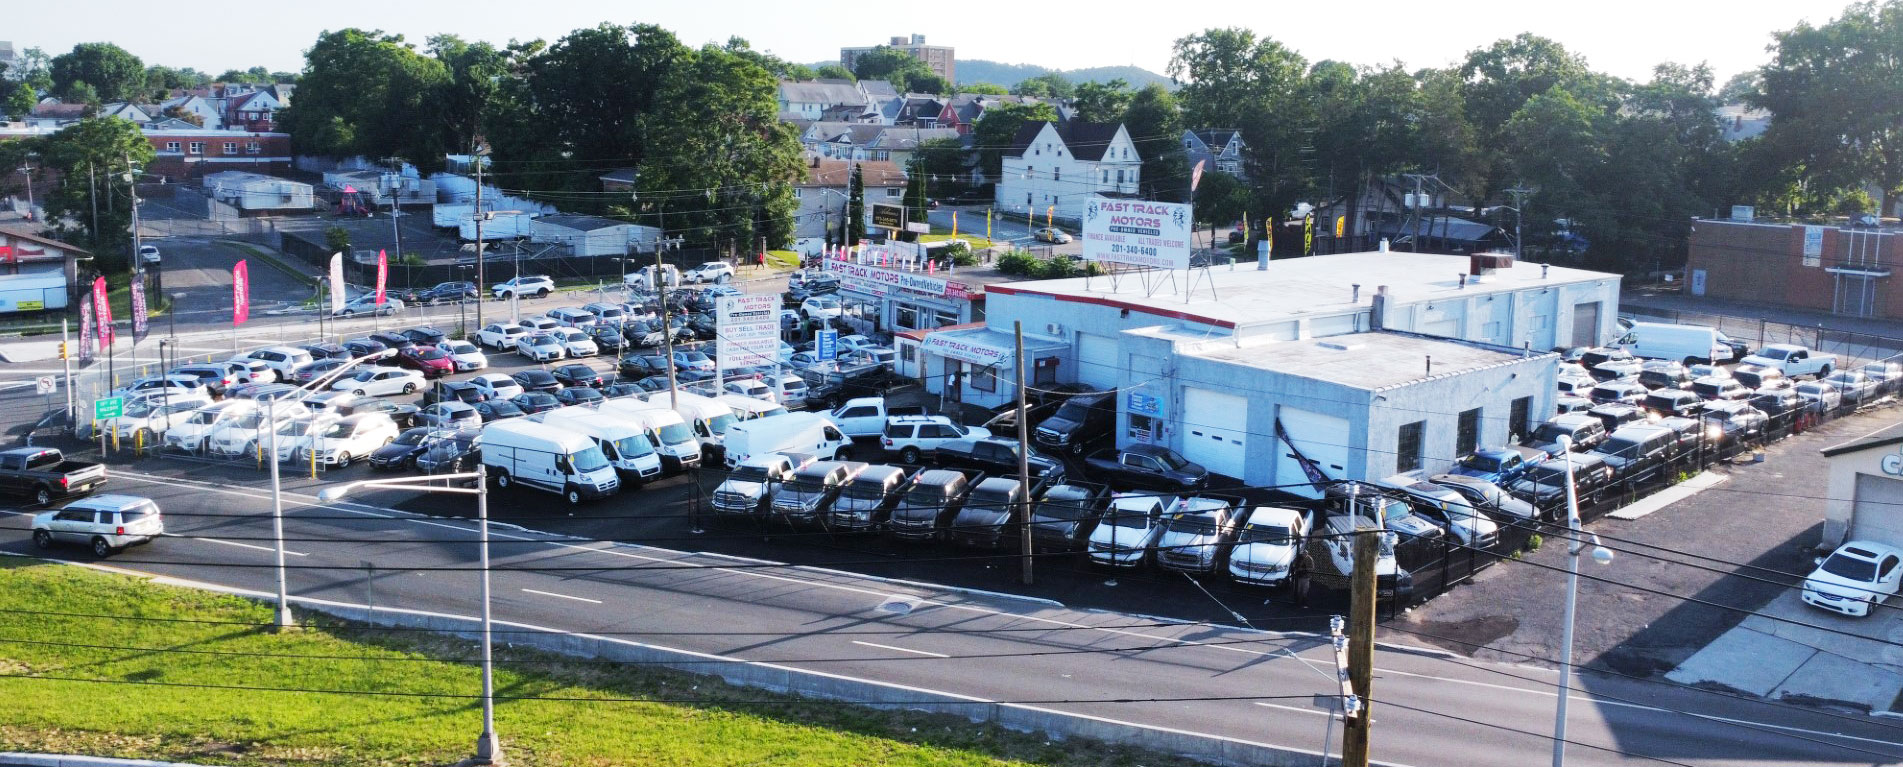 Used cars for sale in Paterson | Fast Track Motors. Paterson New Jersey